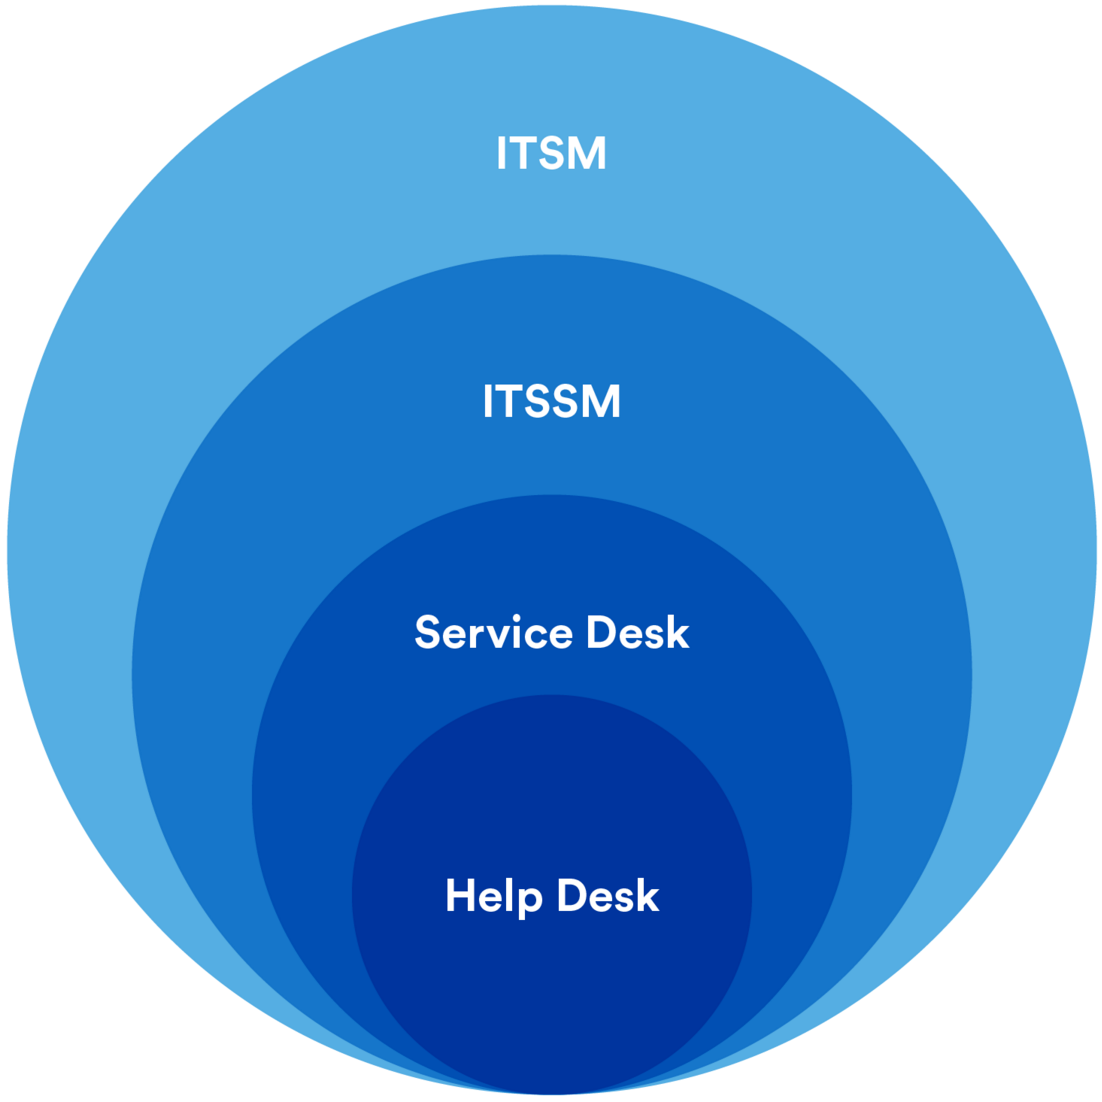 Help desk vs. service desk vs. ITSM what's the difference? Part 2 of 2